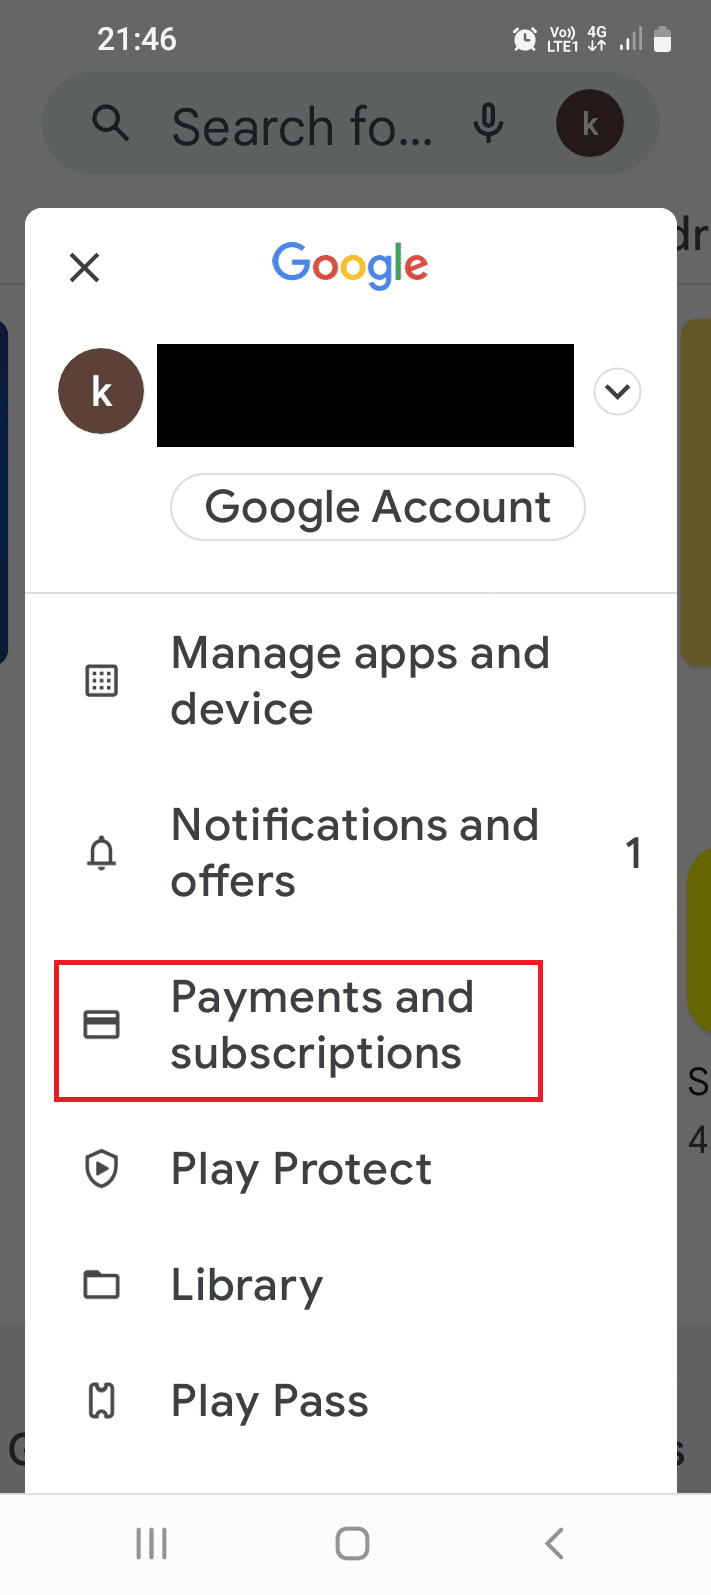 Tap on the Payments and subscriptions option